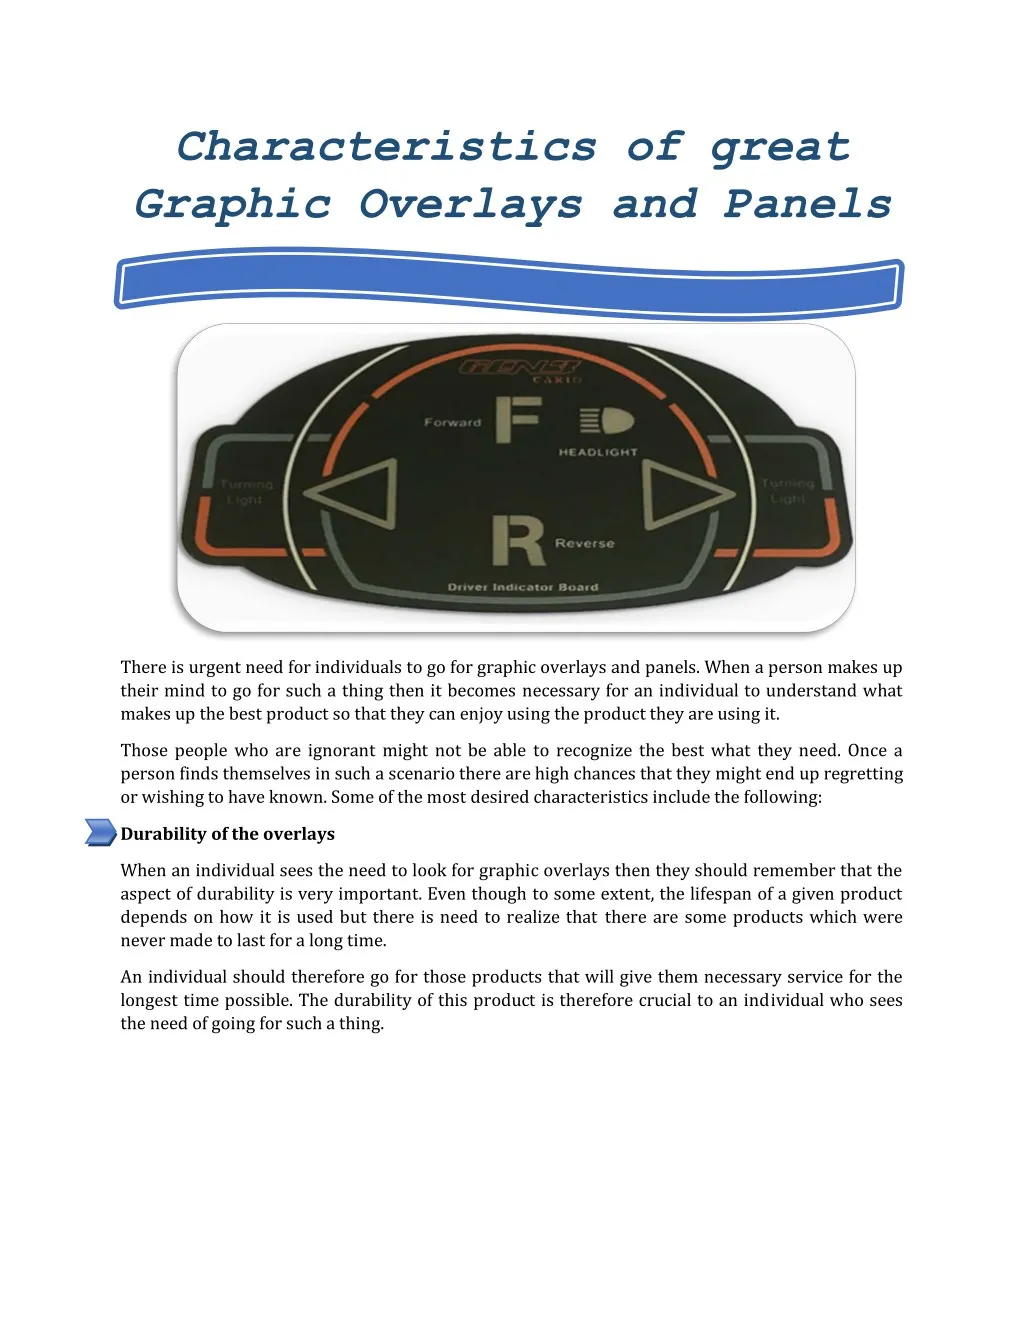 characteristics of great graphic overlays